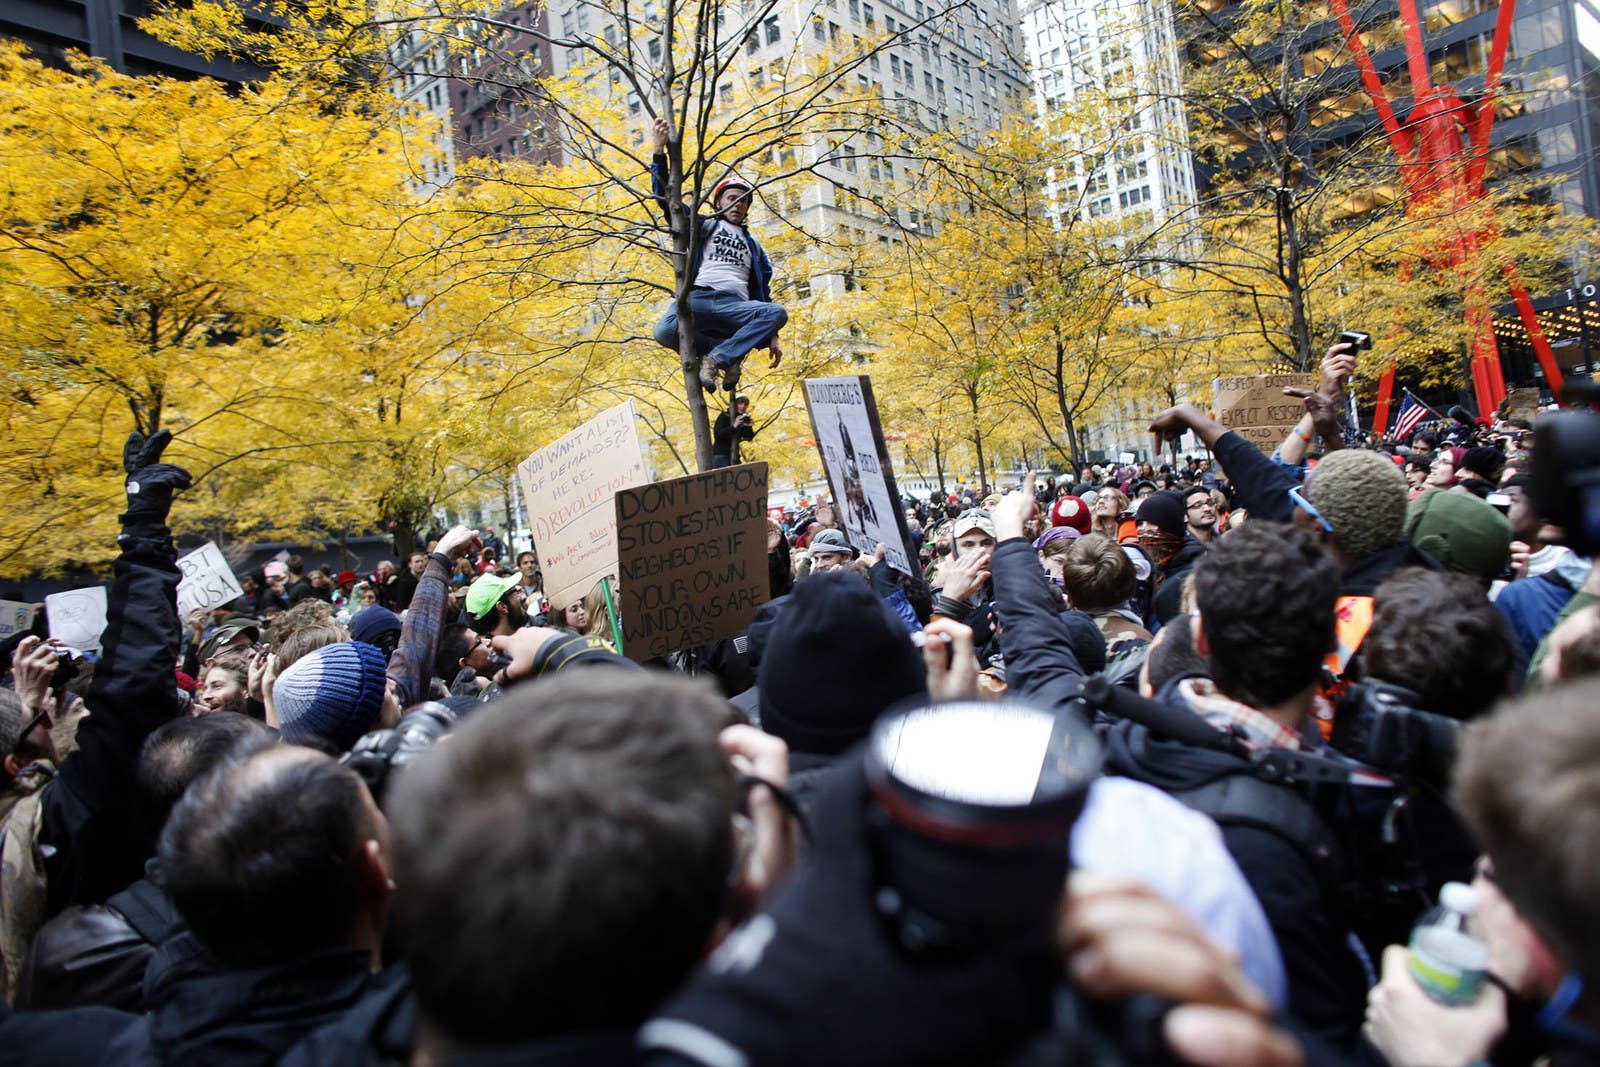 A protester climbs a tree in Zuccotti Park on Nov. 17, 2011.